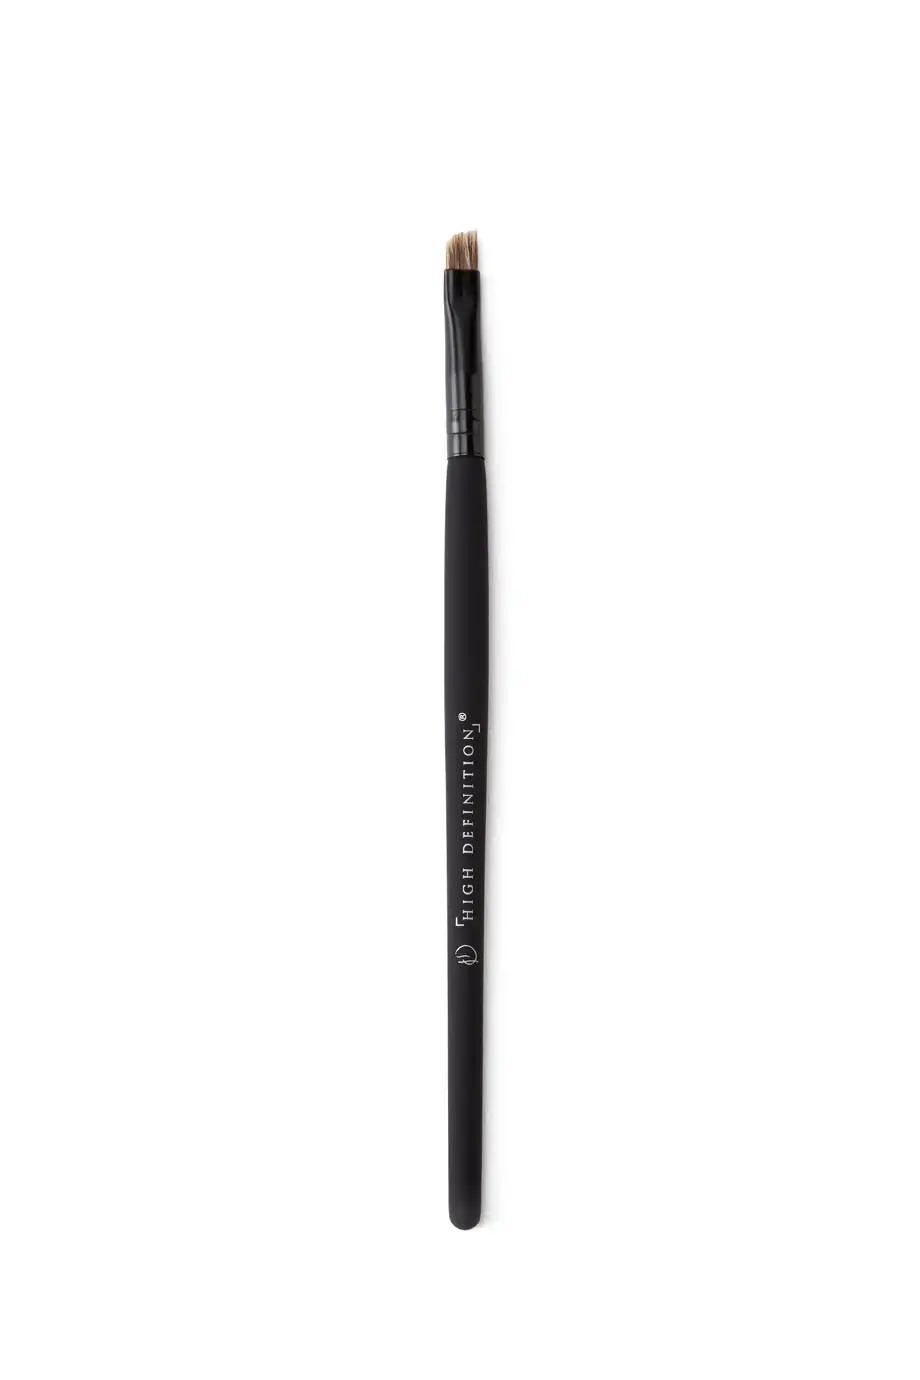 High Definition Brows Angled Brow Brush